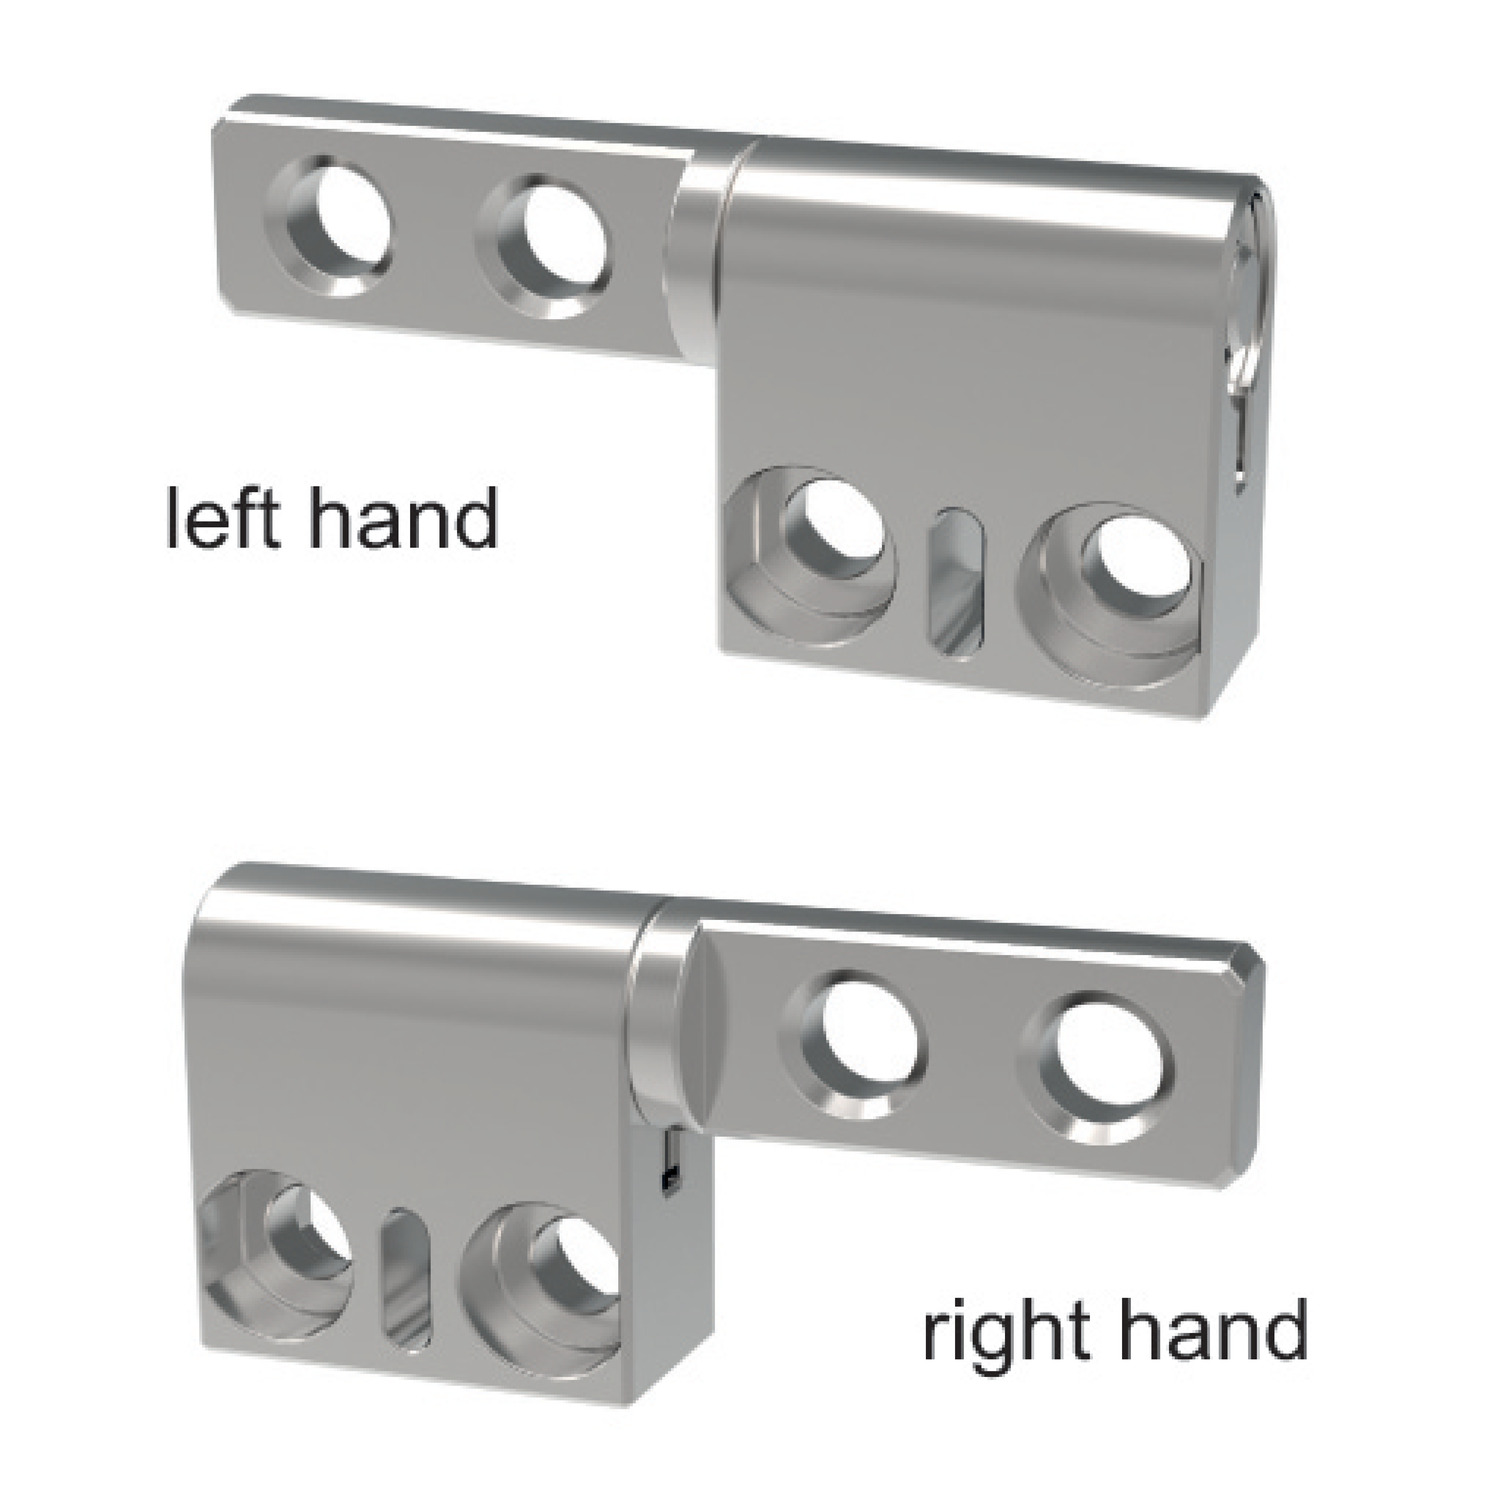 Friction Hinges Asymmetric torque friction hinges with a torque of 0,5 - 1,1 Nm. Counter bored.